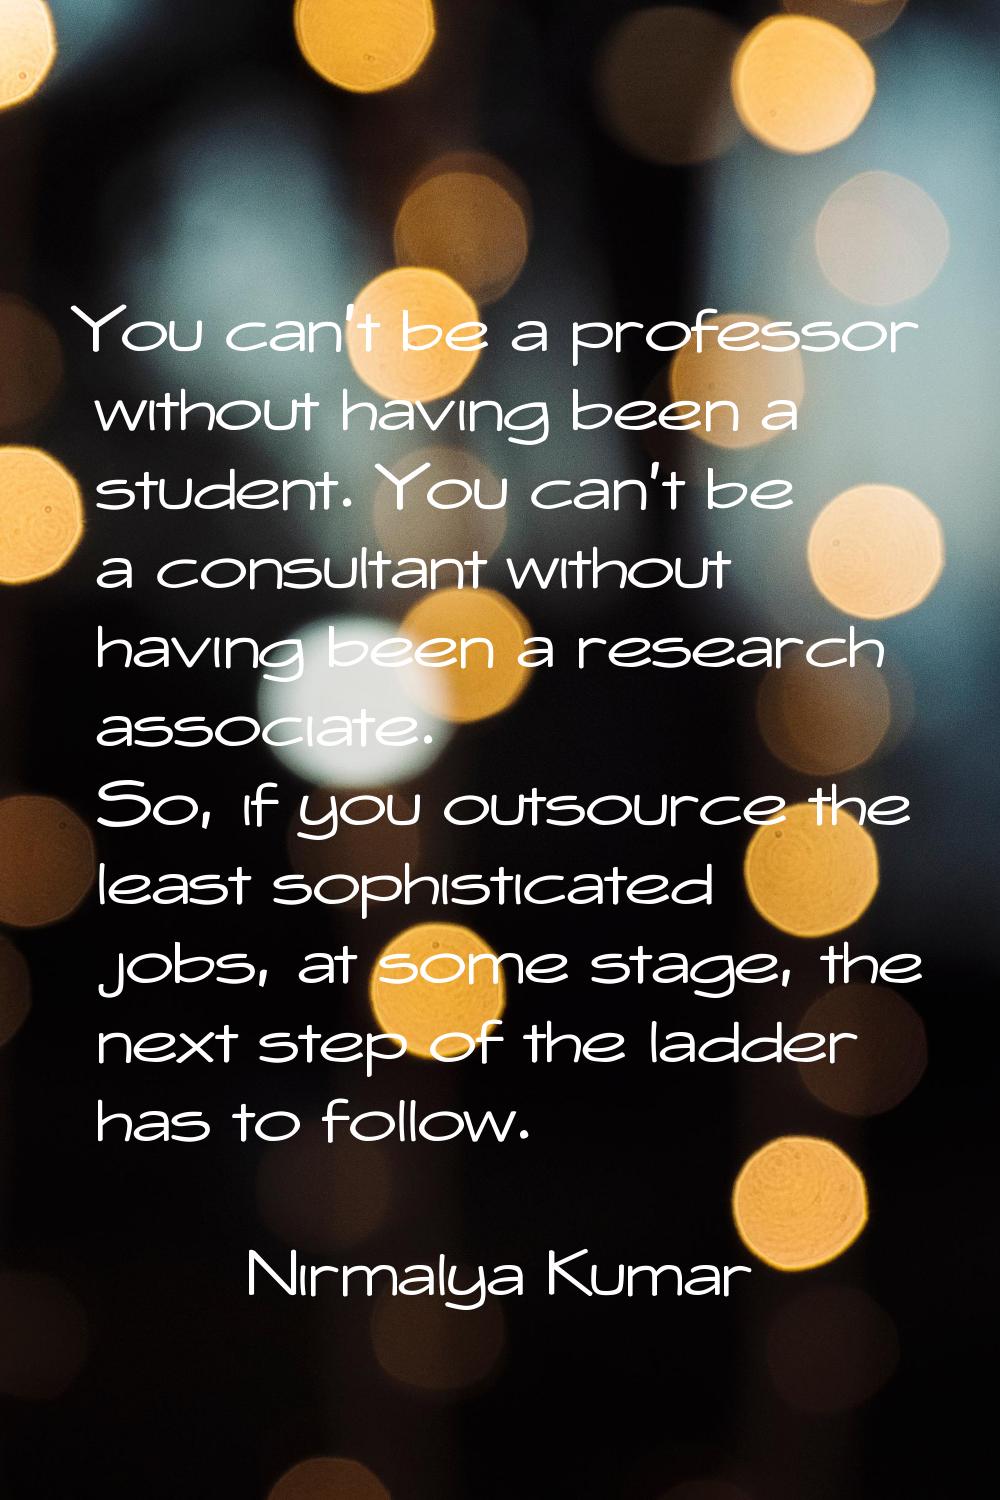 You can't be a professor without having been a student. You can't be a consultant without having be